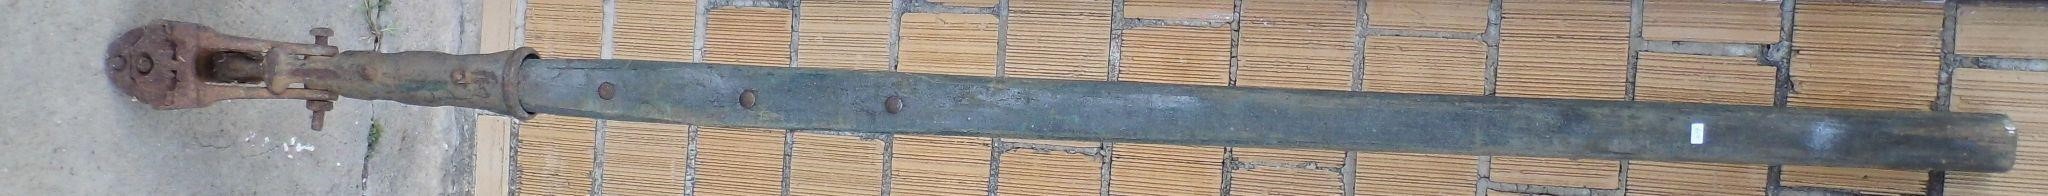 Vintage Railcar Mover Tool 75"